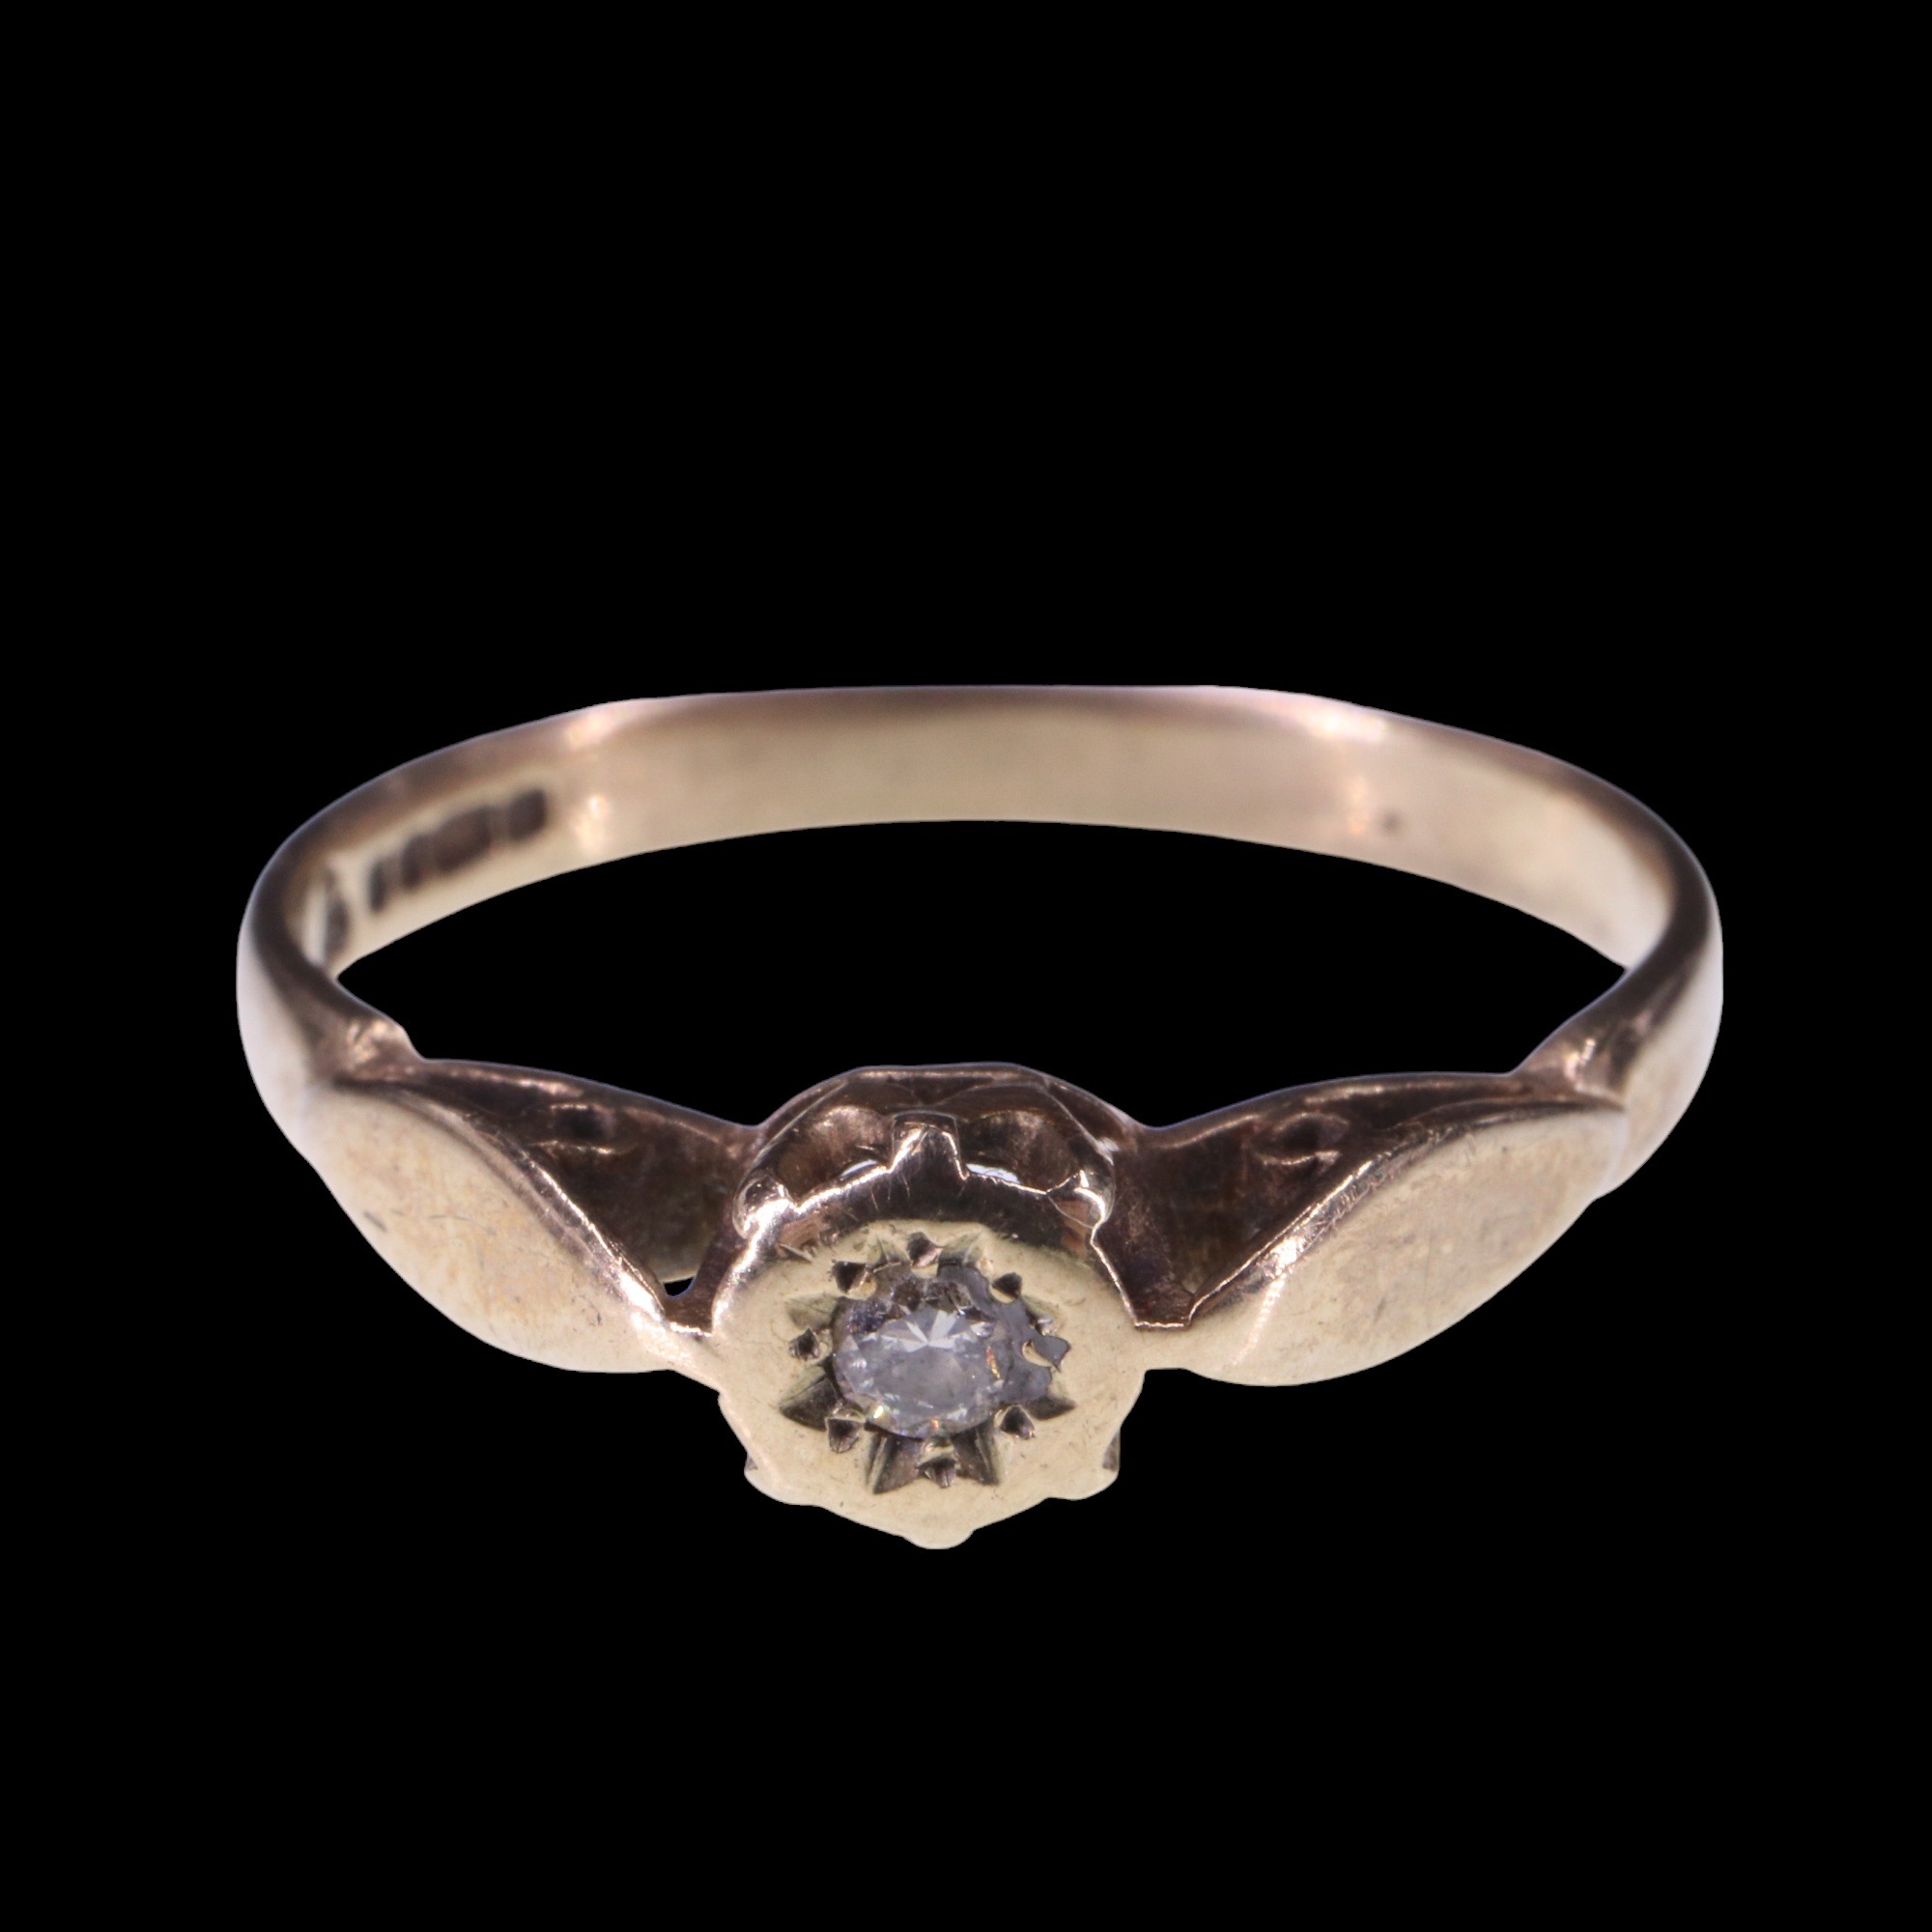 A solitaire diamond ring, having an illusion set 2.5 mm diamond brilliant set on an open gallery - Image 7 of 9